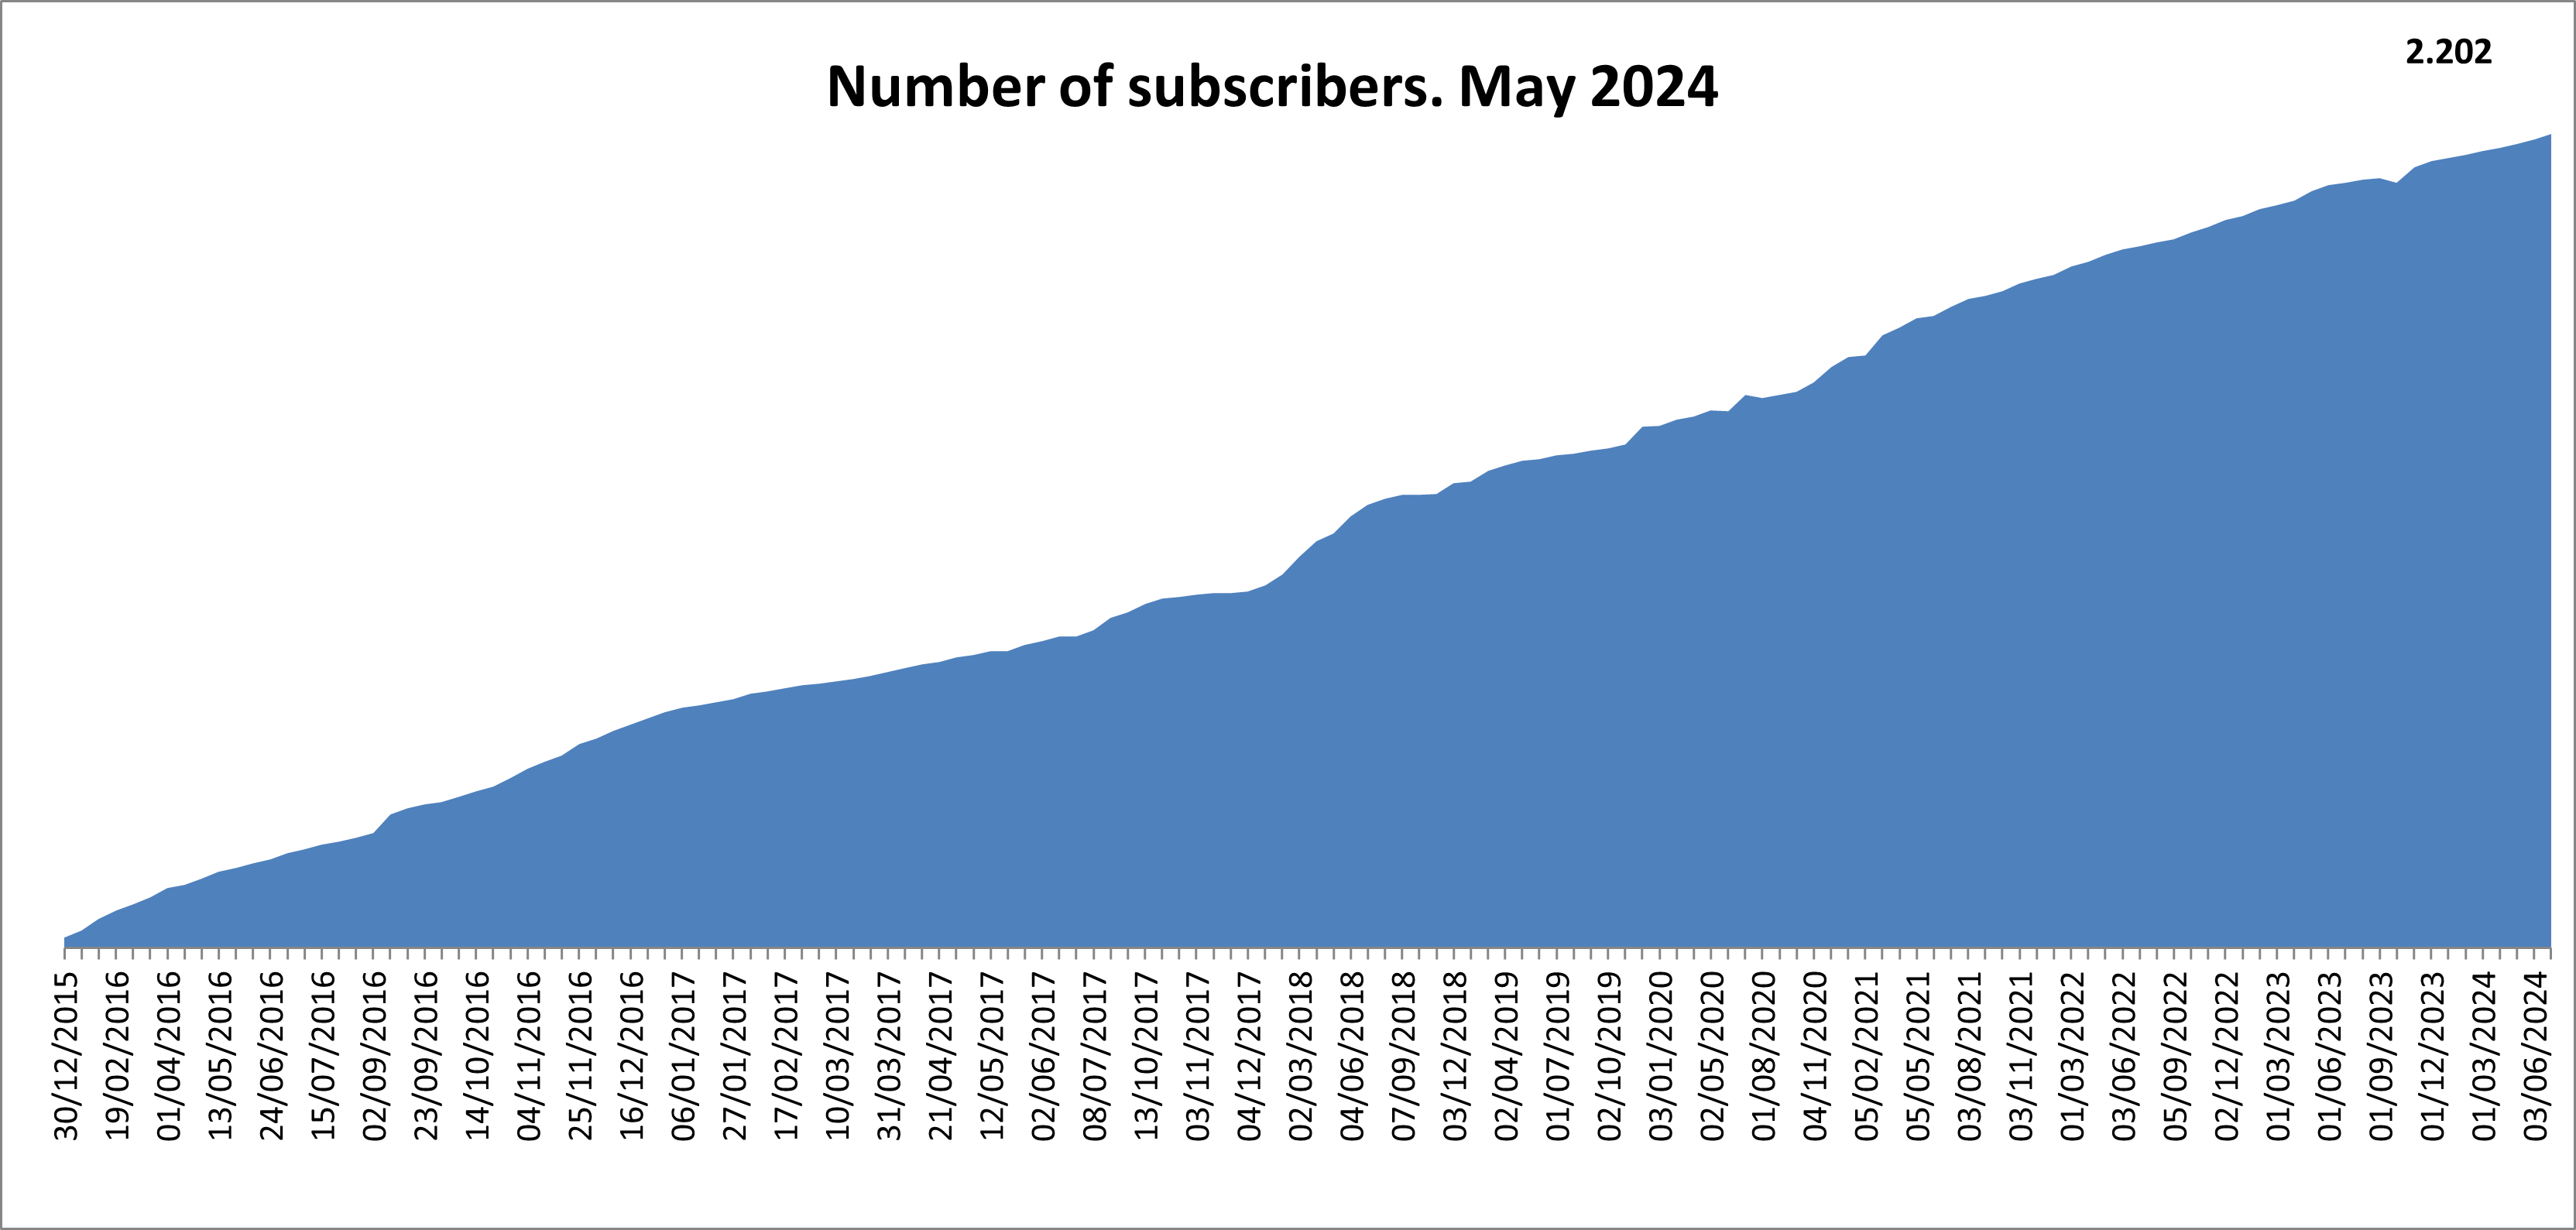 Number of subscribers 1875. March 2022